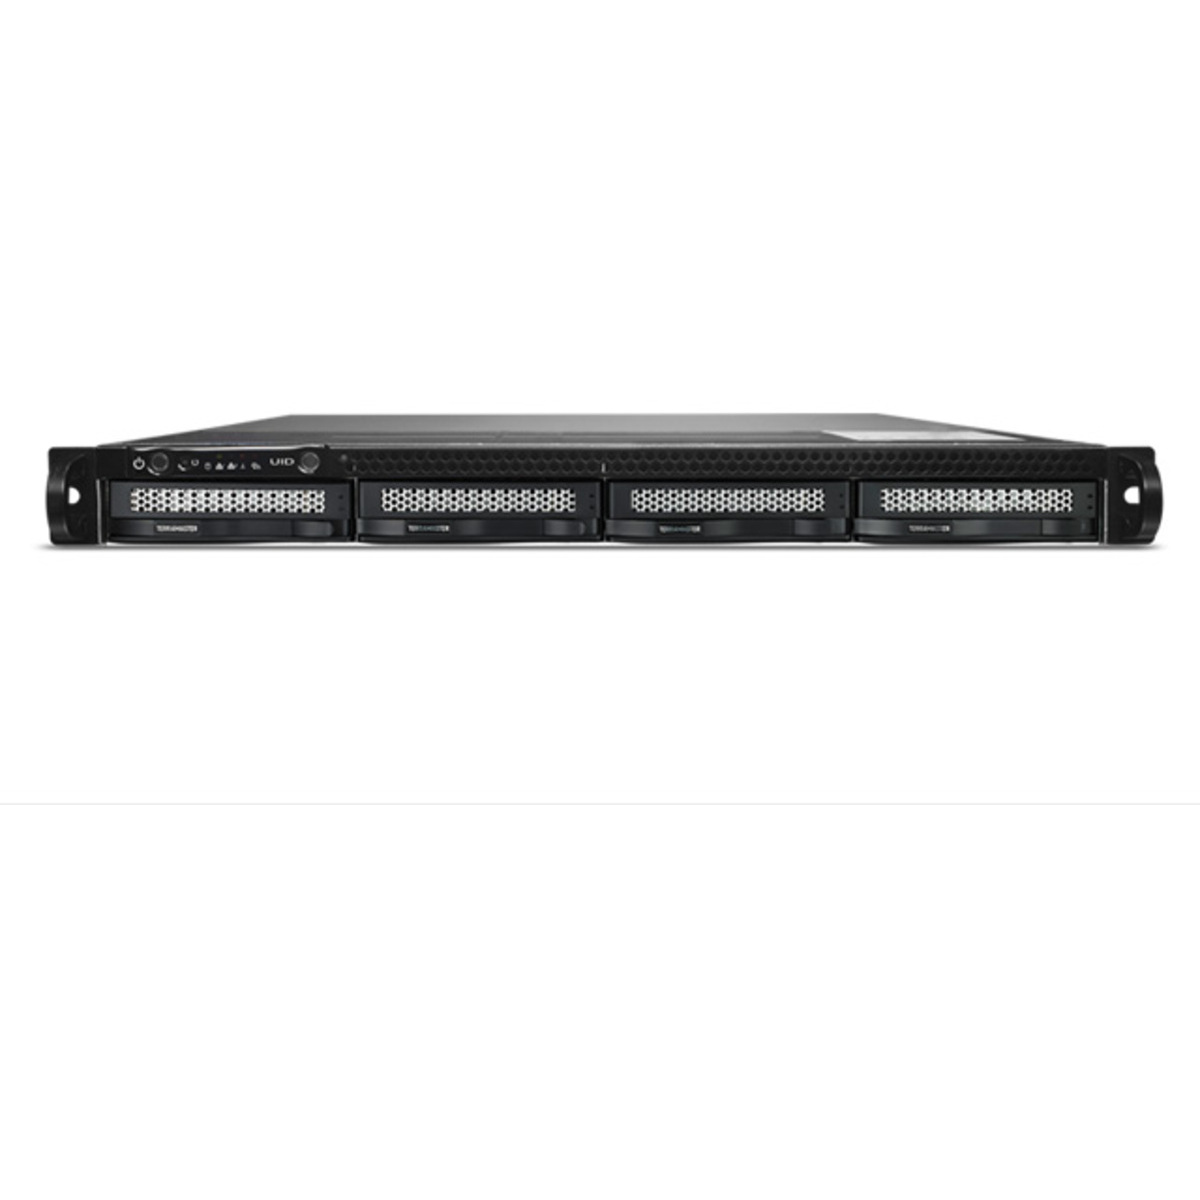 TerraMaster U4-111 36tb 4-Bay RackMount Multimedia / Power User / Business NAS - Network Attached Storage Device 3x12tb Seagate EXOS X18 ST12000NM000J 3.5 7200rpm SATA 6Gb/s HDD ENTERPRISE Class Drives Installed - Burn-In Tested U4-111